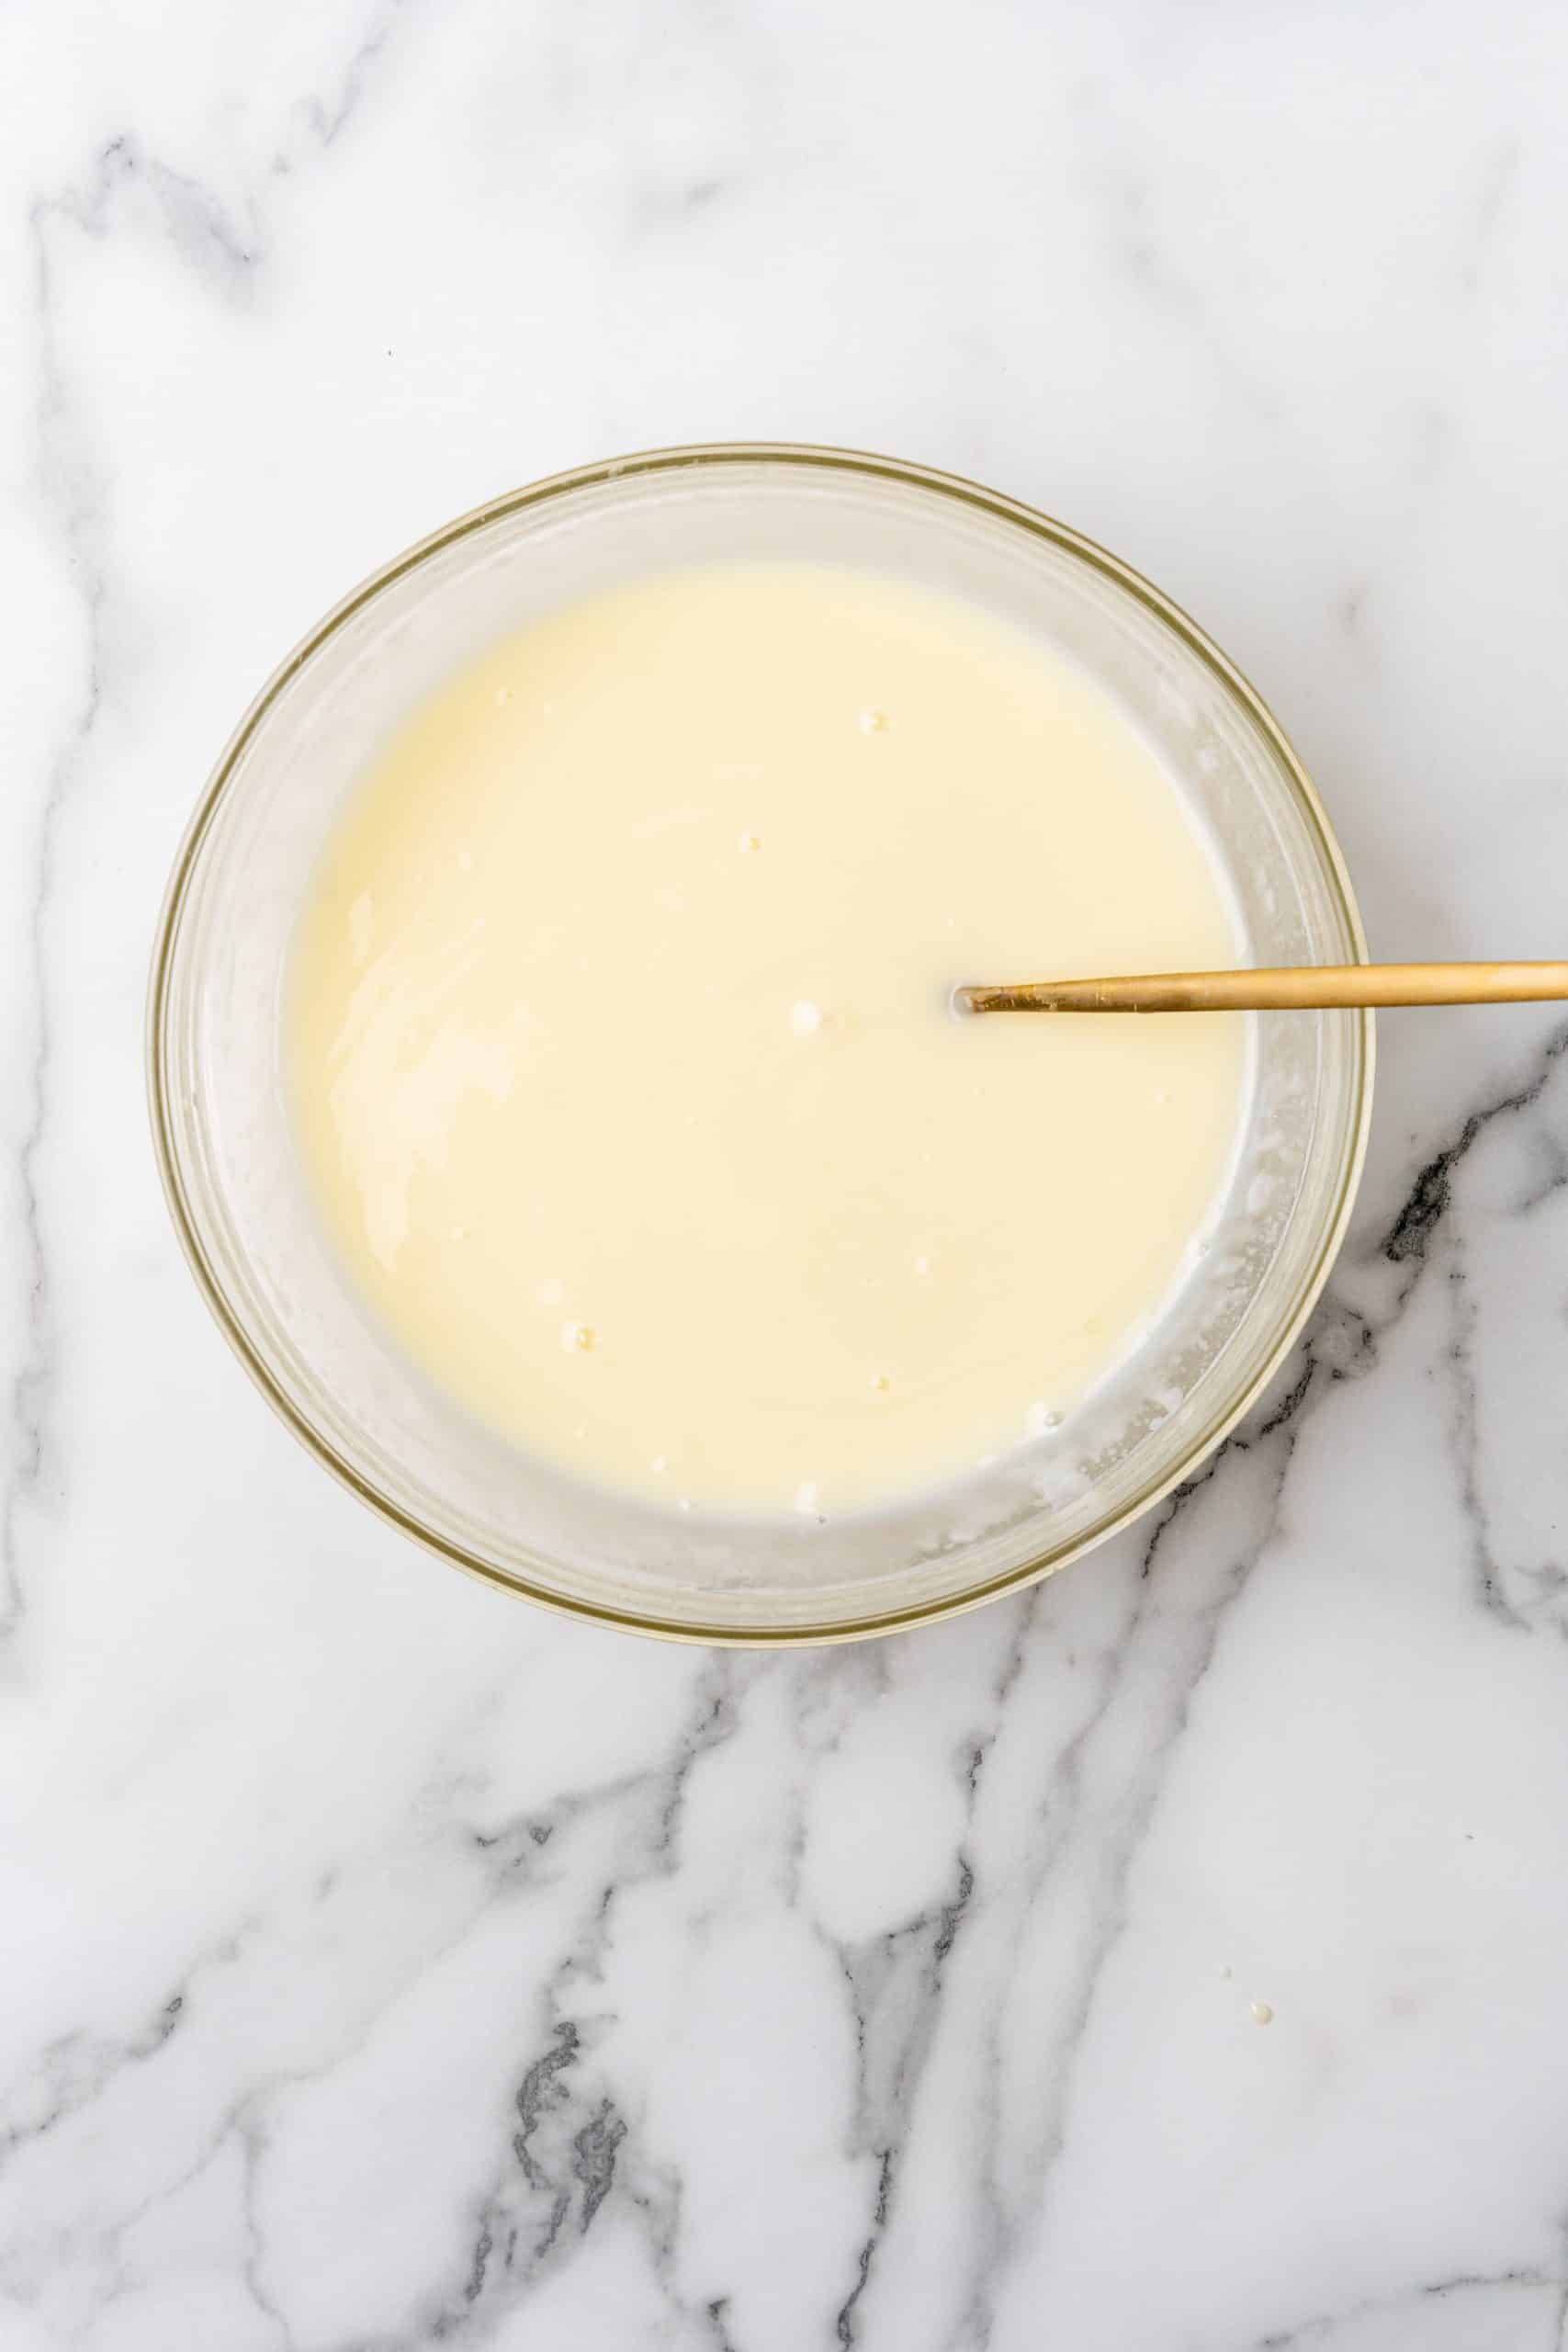 creamy lemonade mixture in a glass mixing bowl